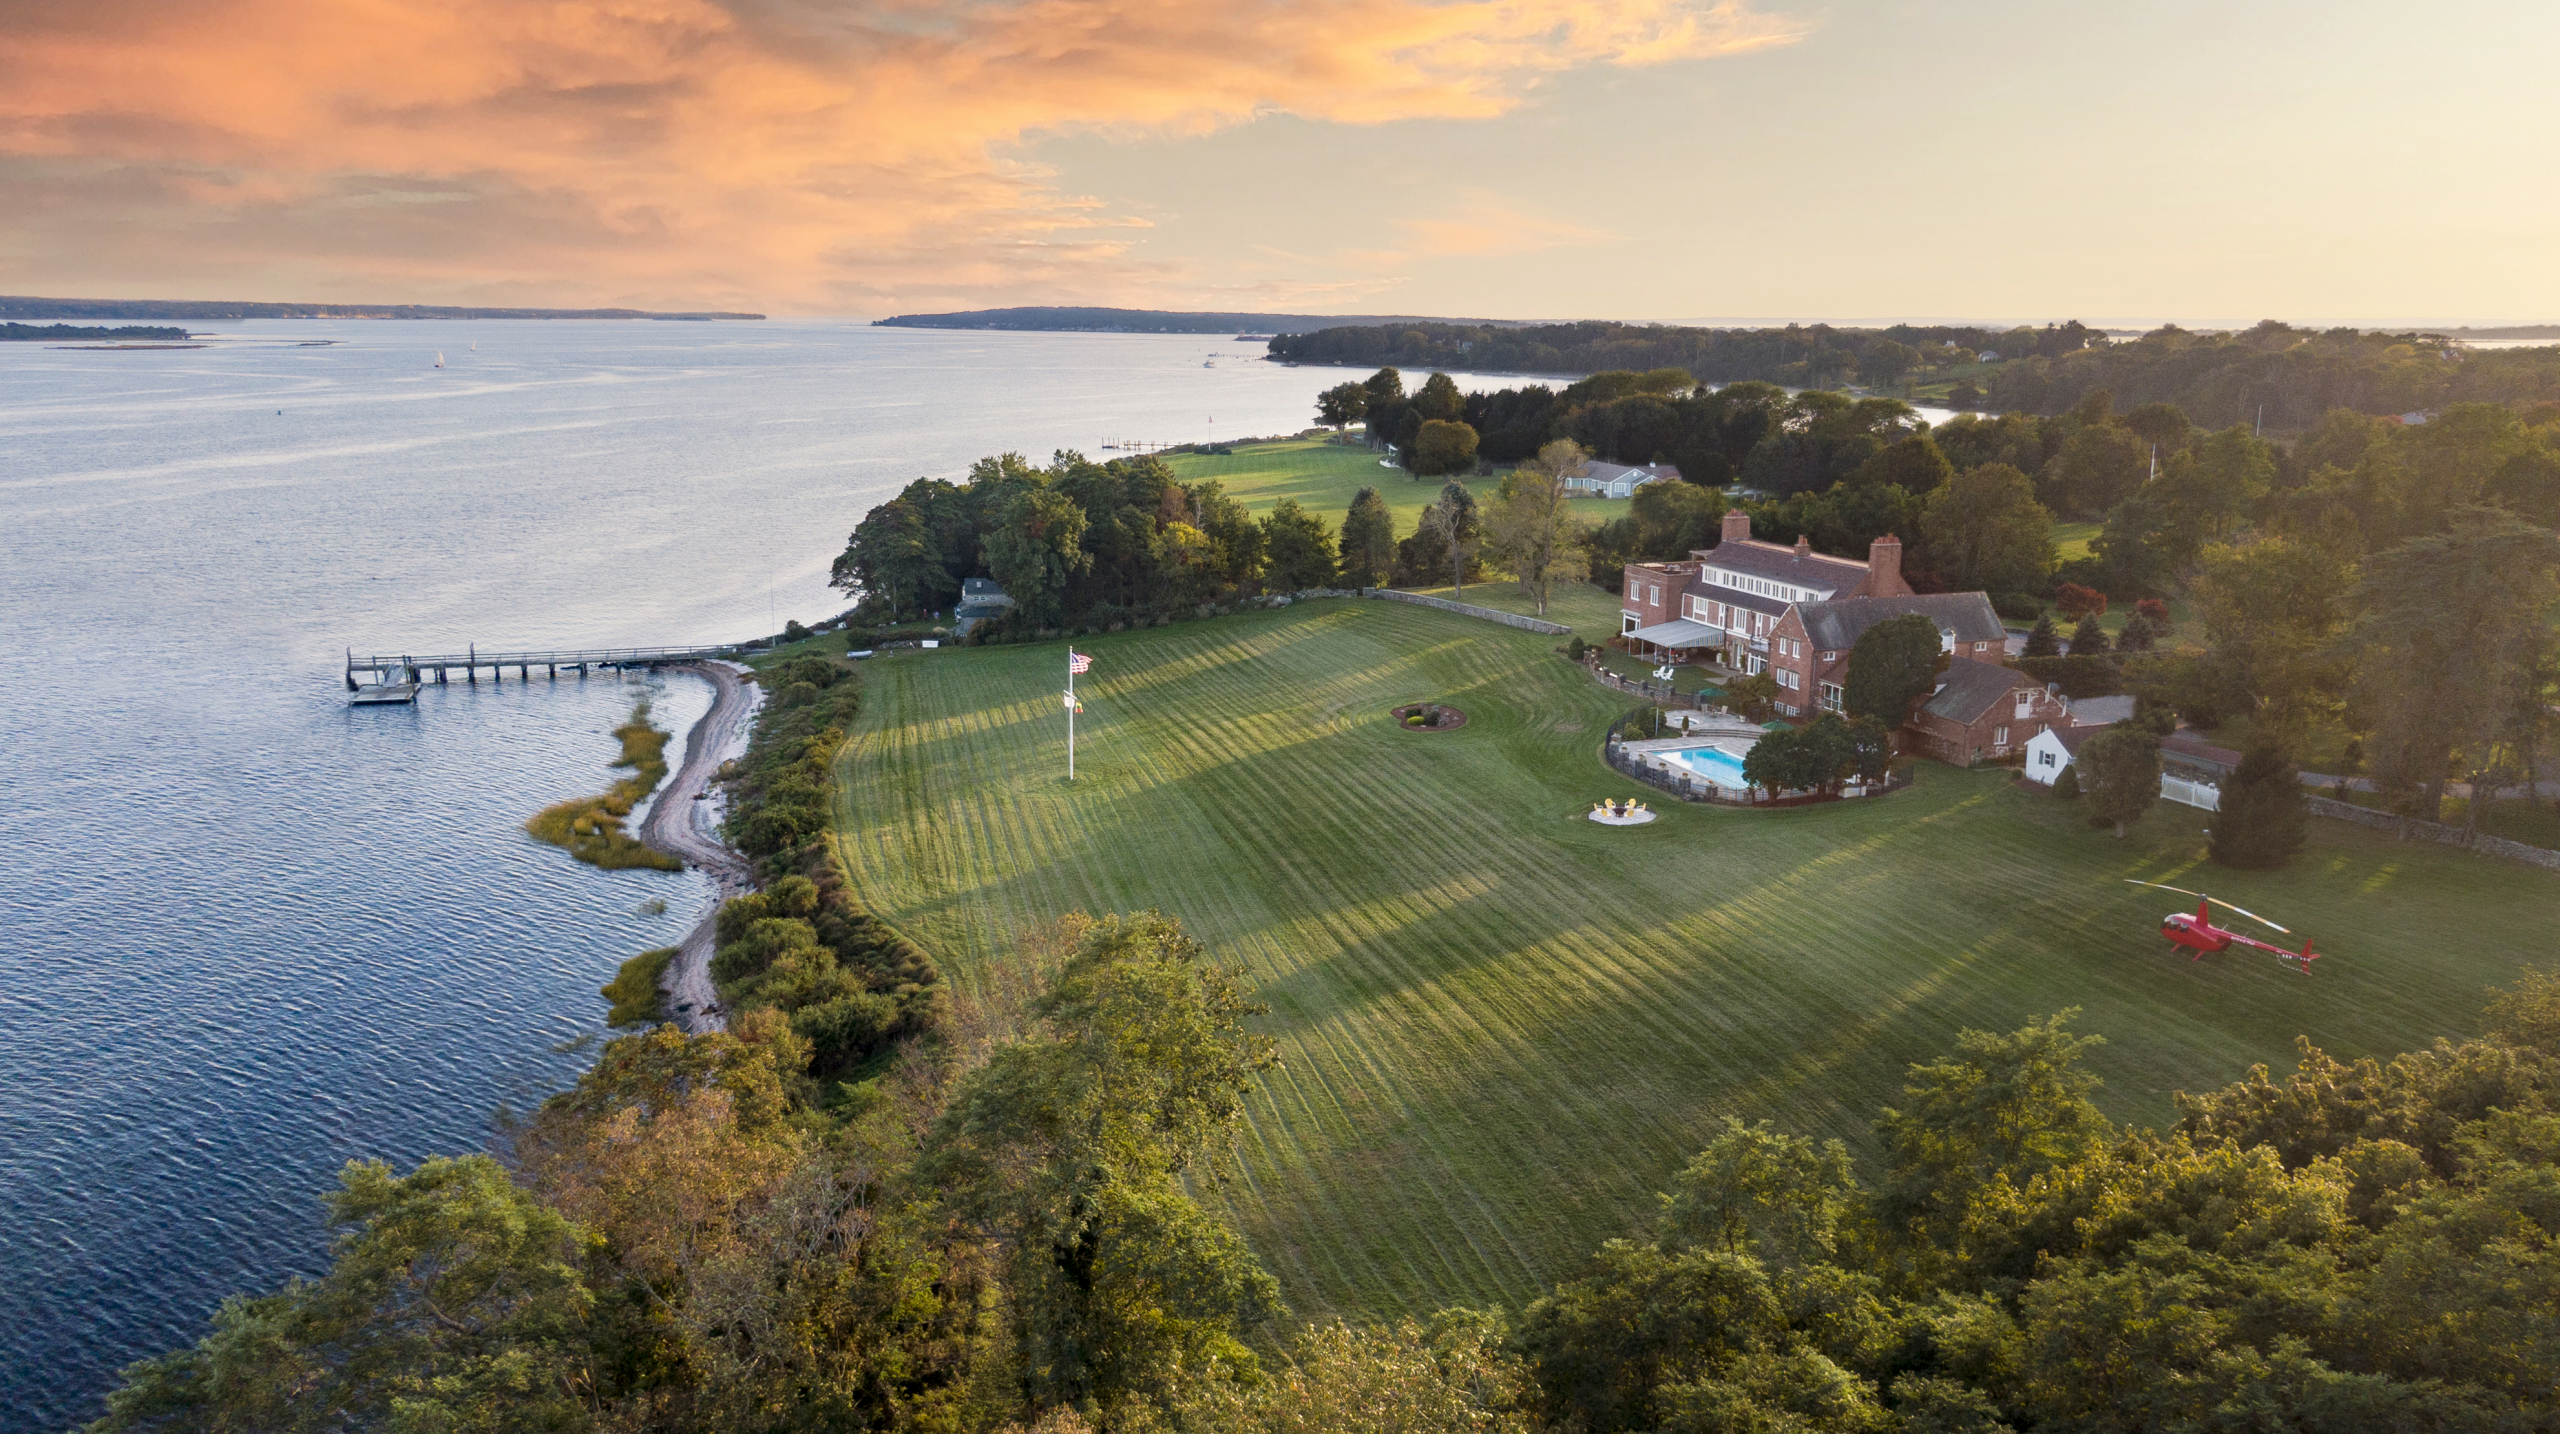 HOUSE OF THE WEEK: POPPASQUASH POINT ESTATE OFFERED FOR $6.95 MILLION